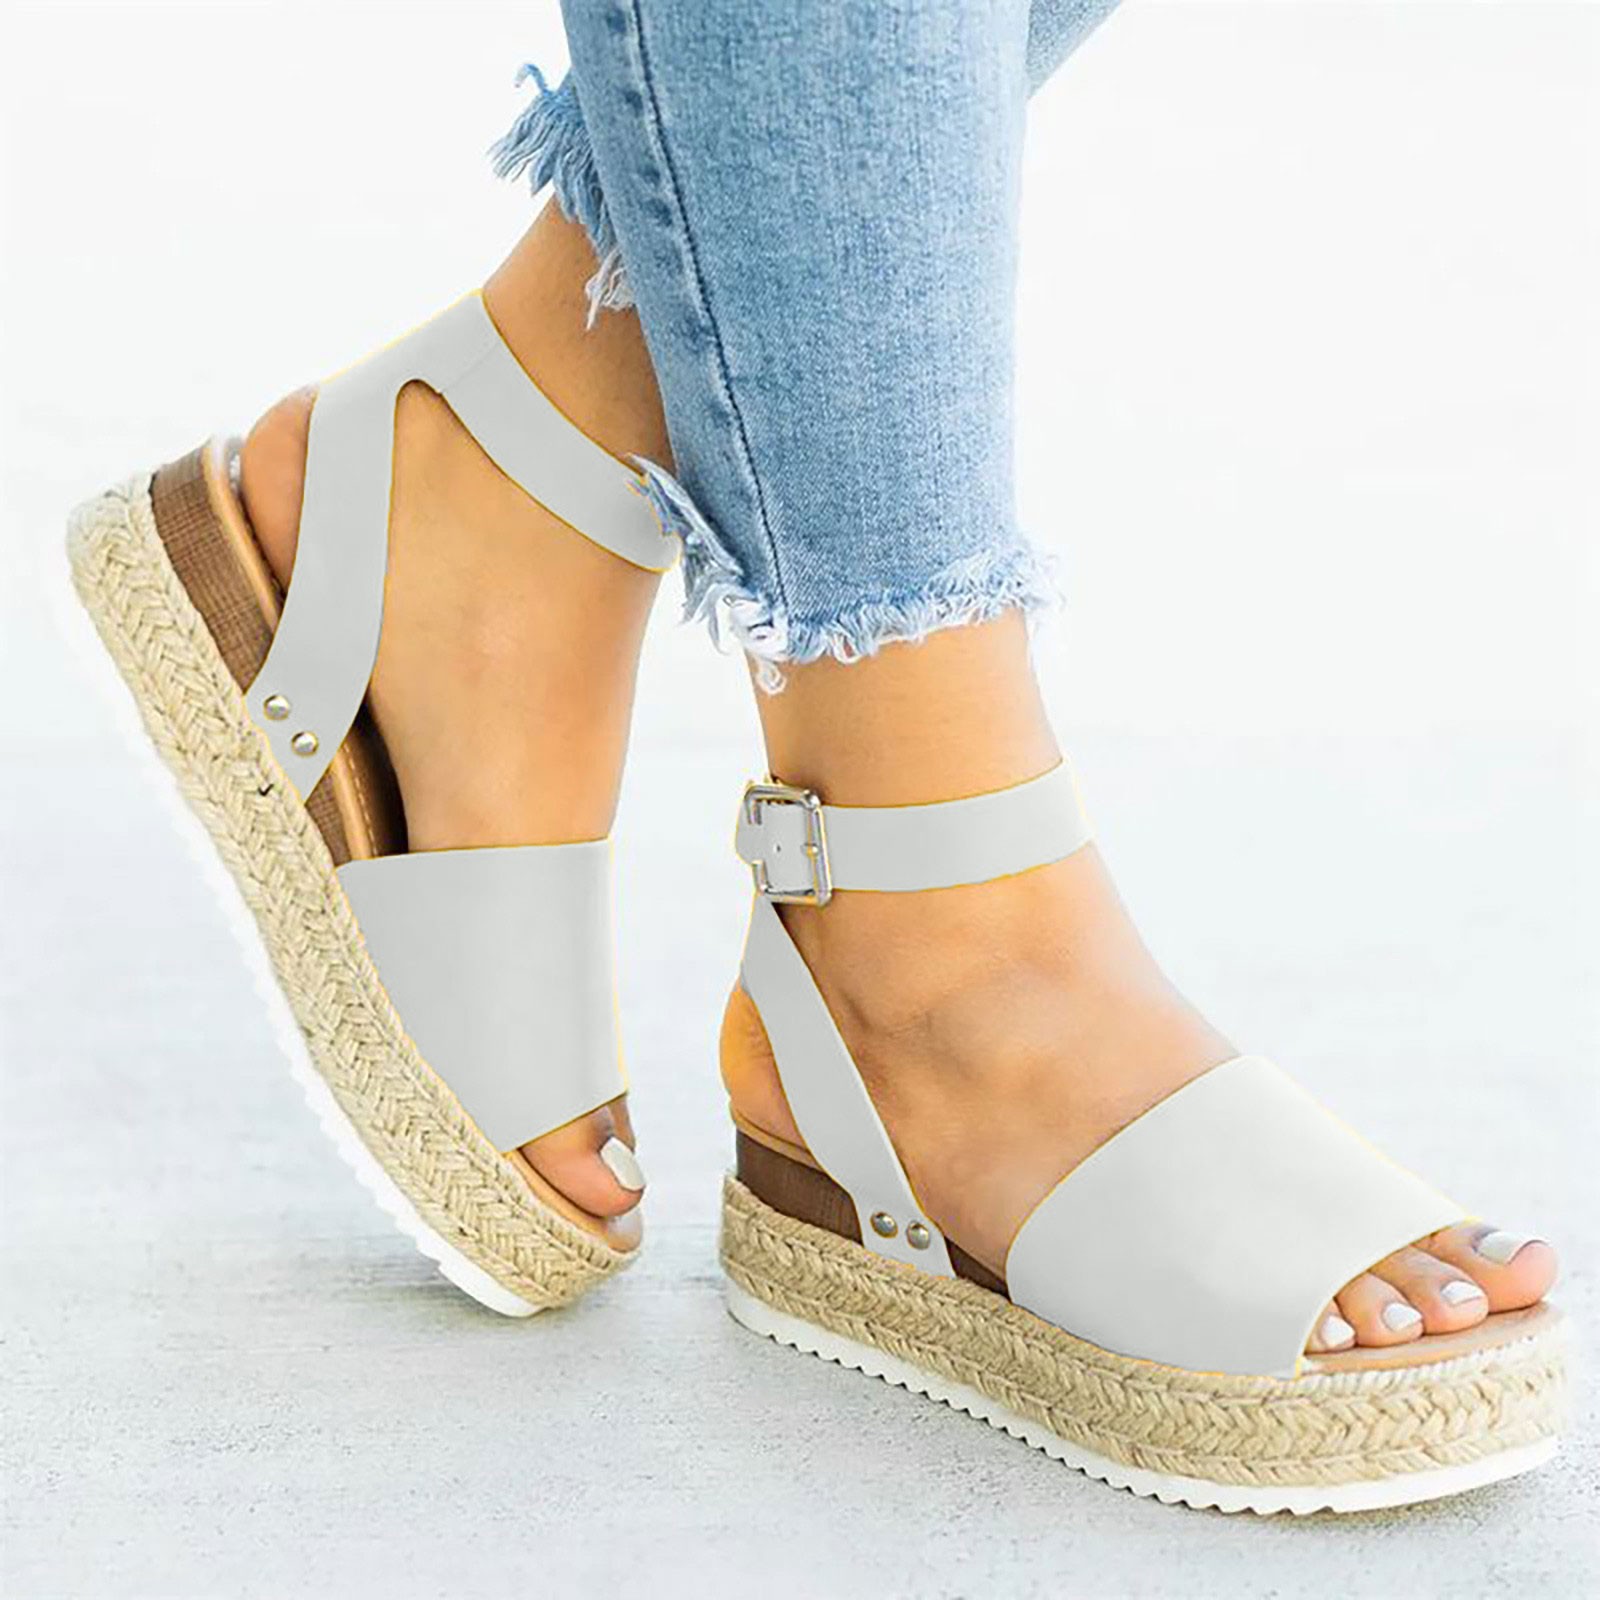 Azrian Woman Summer Sandals Open toe Casual Platform Wedge Shoes Casual Canvas Shoes - image 2 of 6